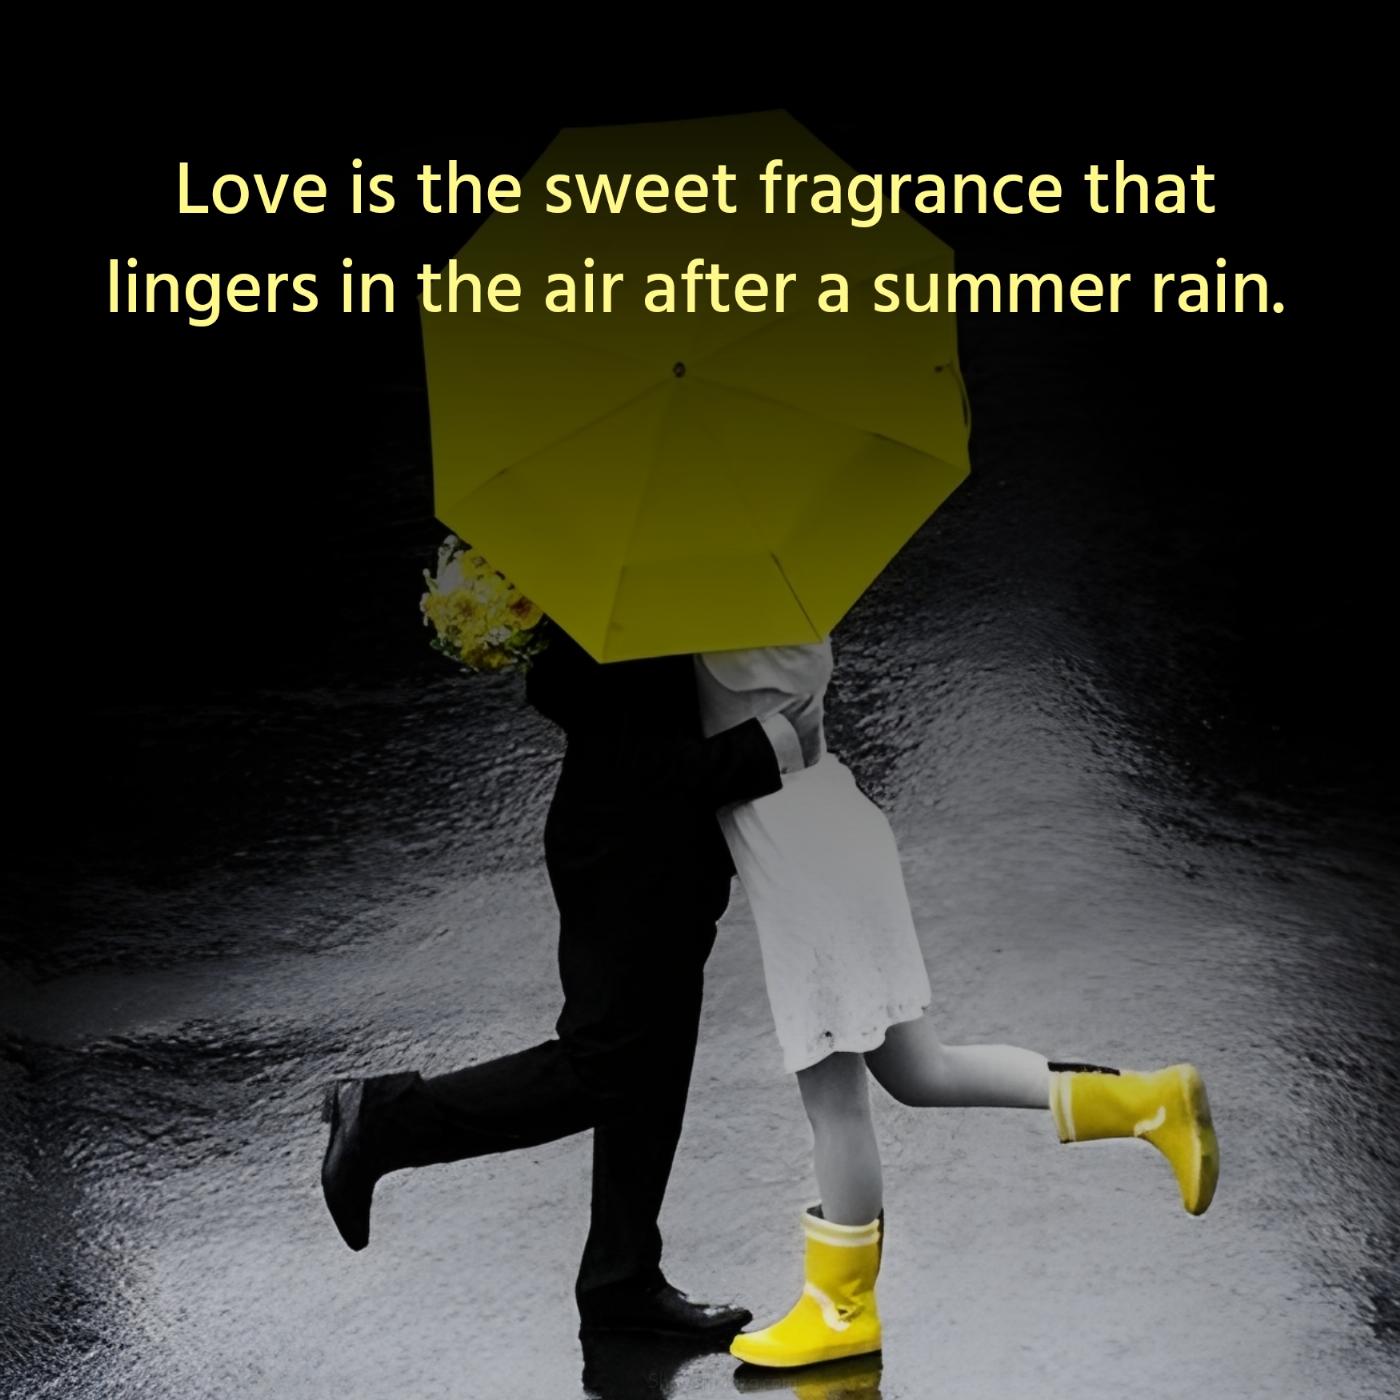 Love is the sweet fragrance that lingers in the air